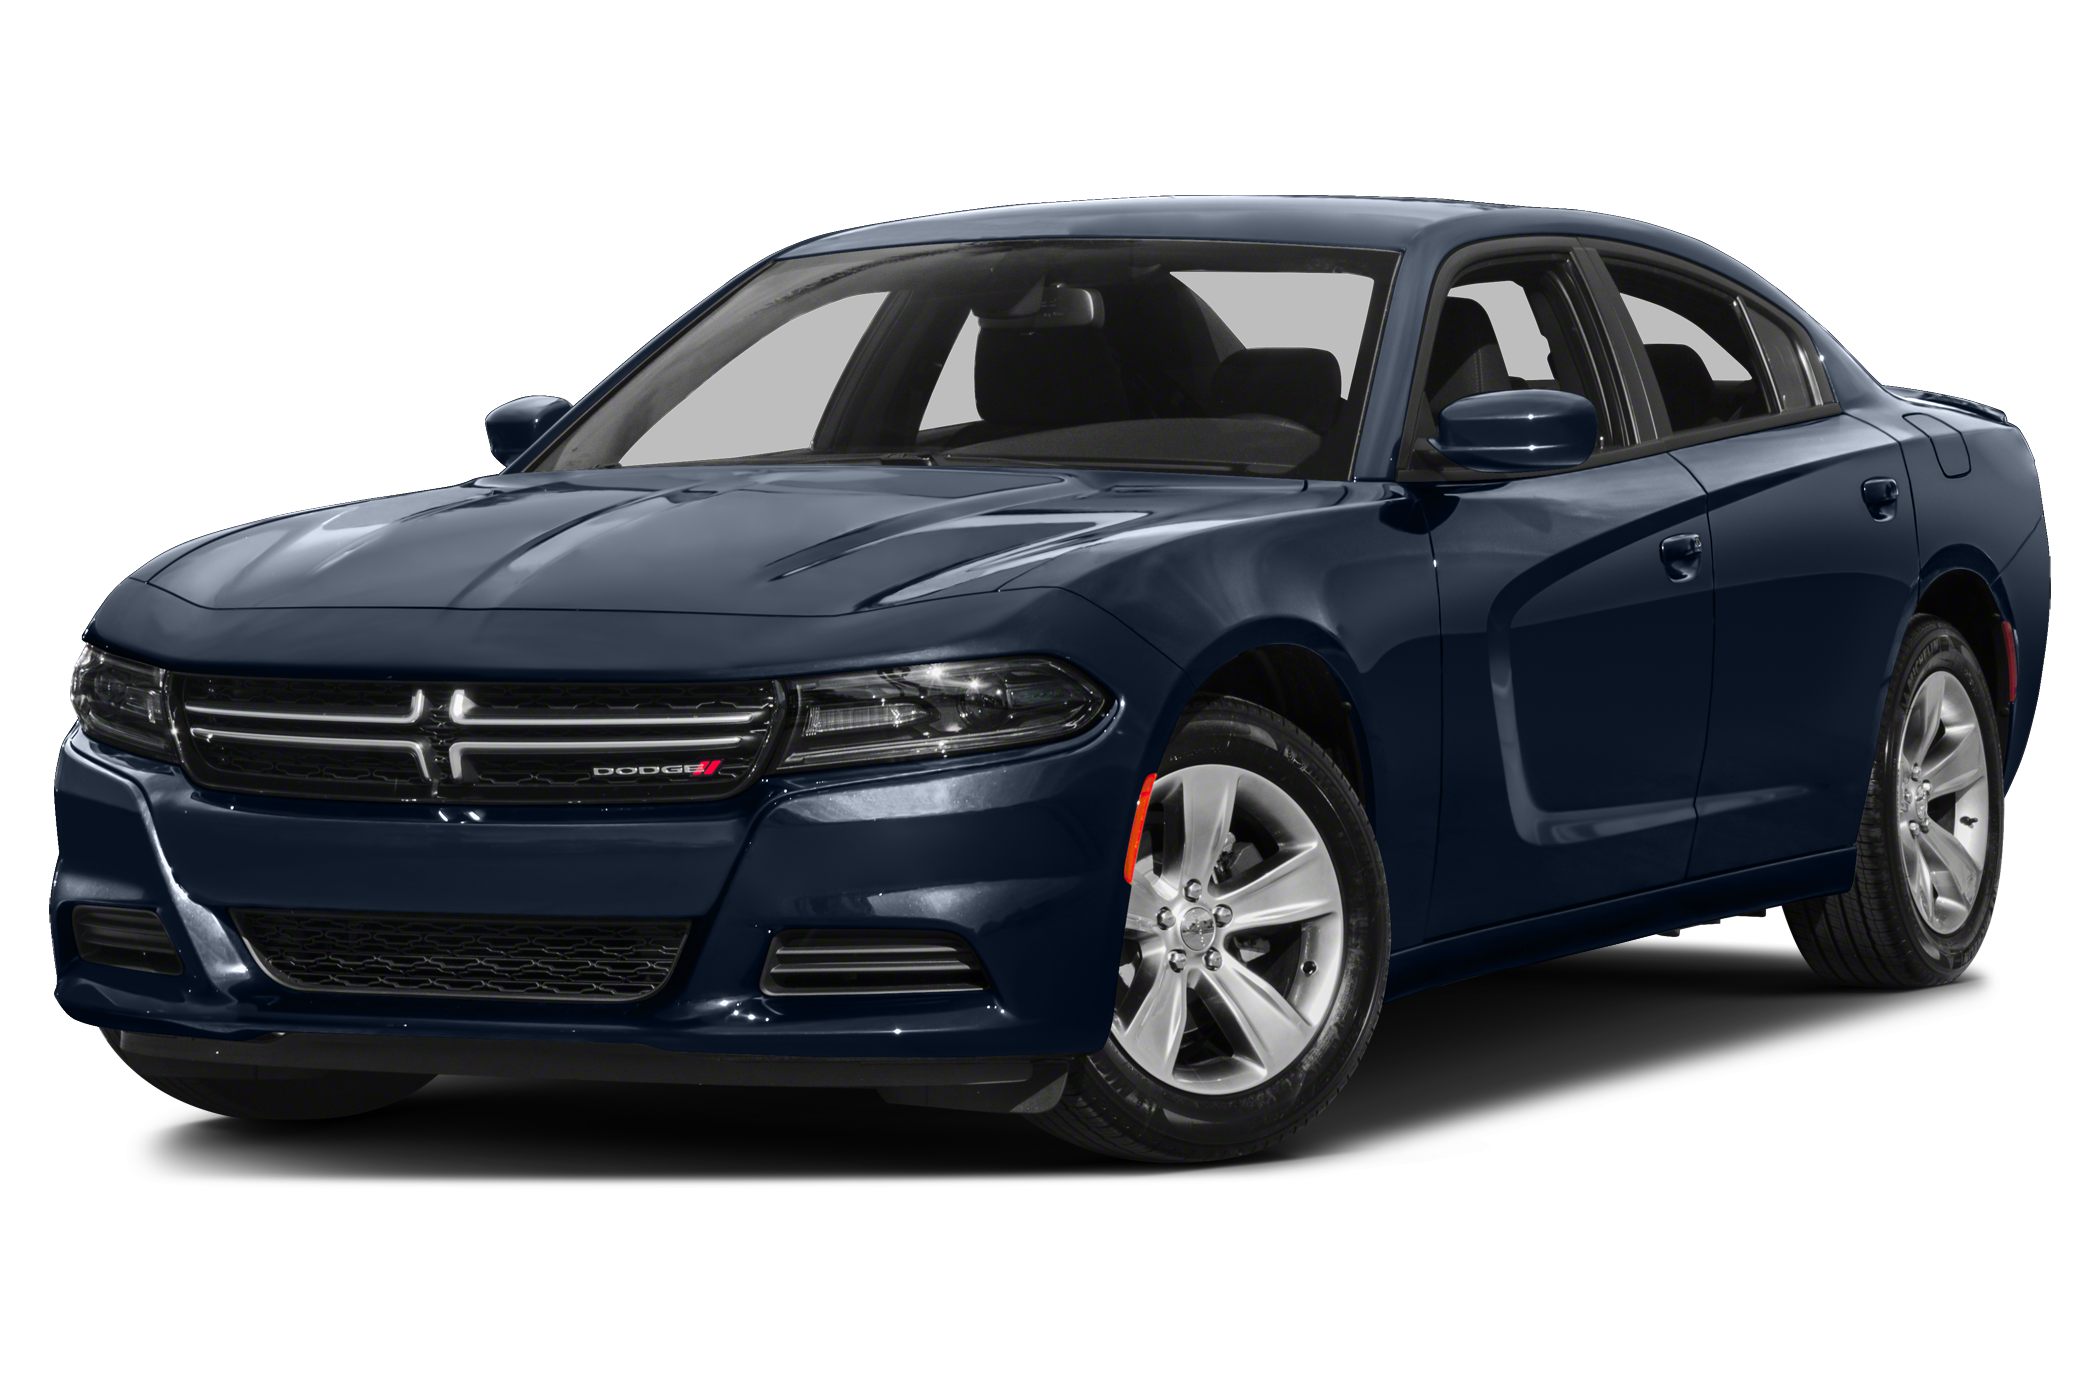 Nice wallpapers Dodge Charger 2100x1386px